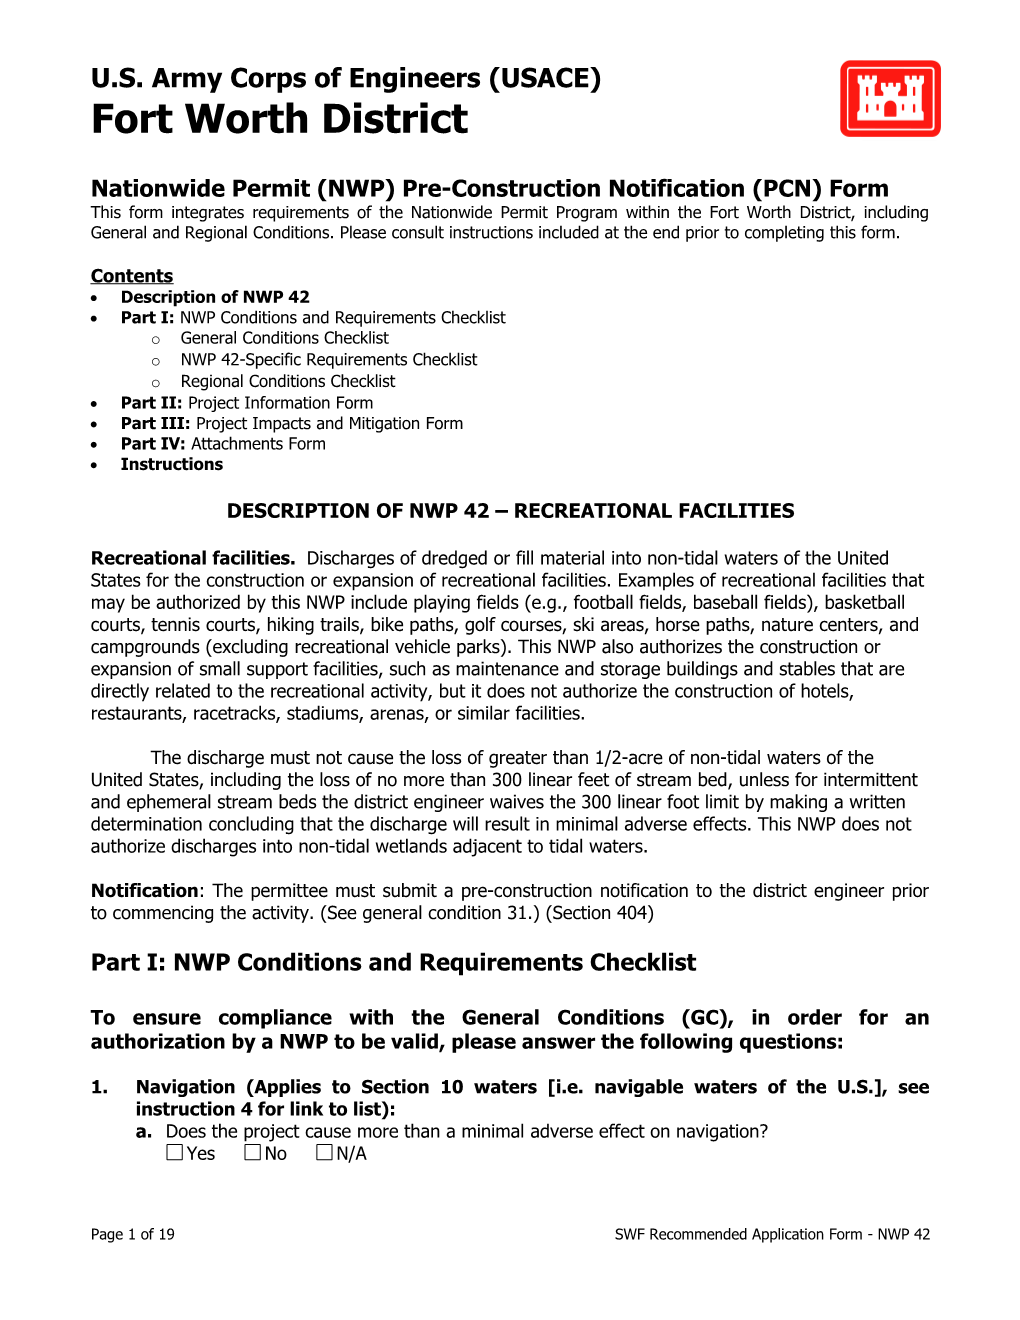 Nationwide Permit (NWP) Pre-Construction Notification (PCN) Form